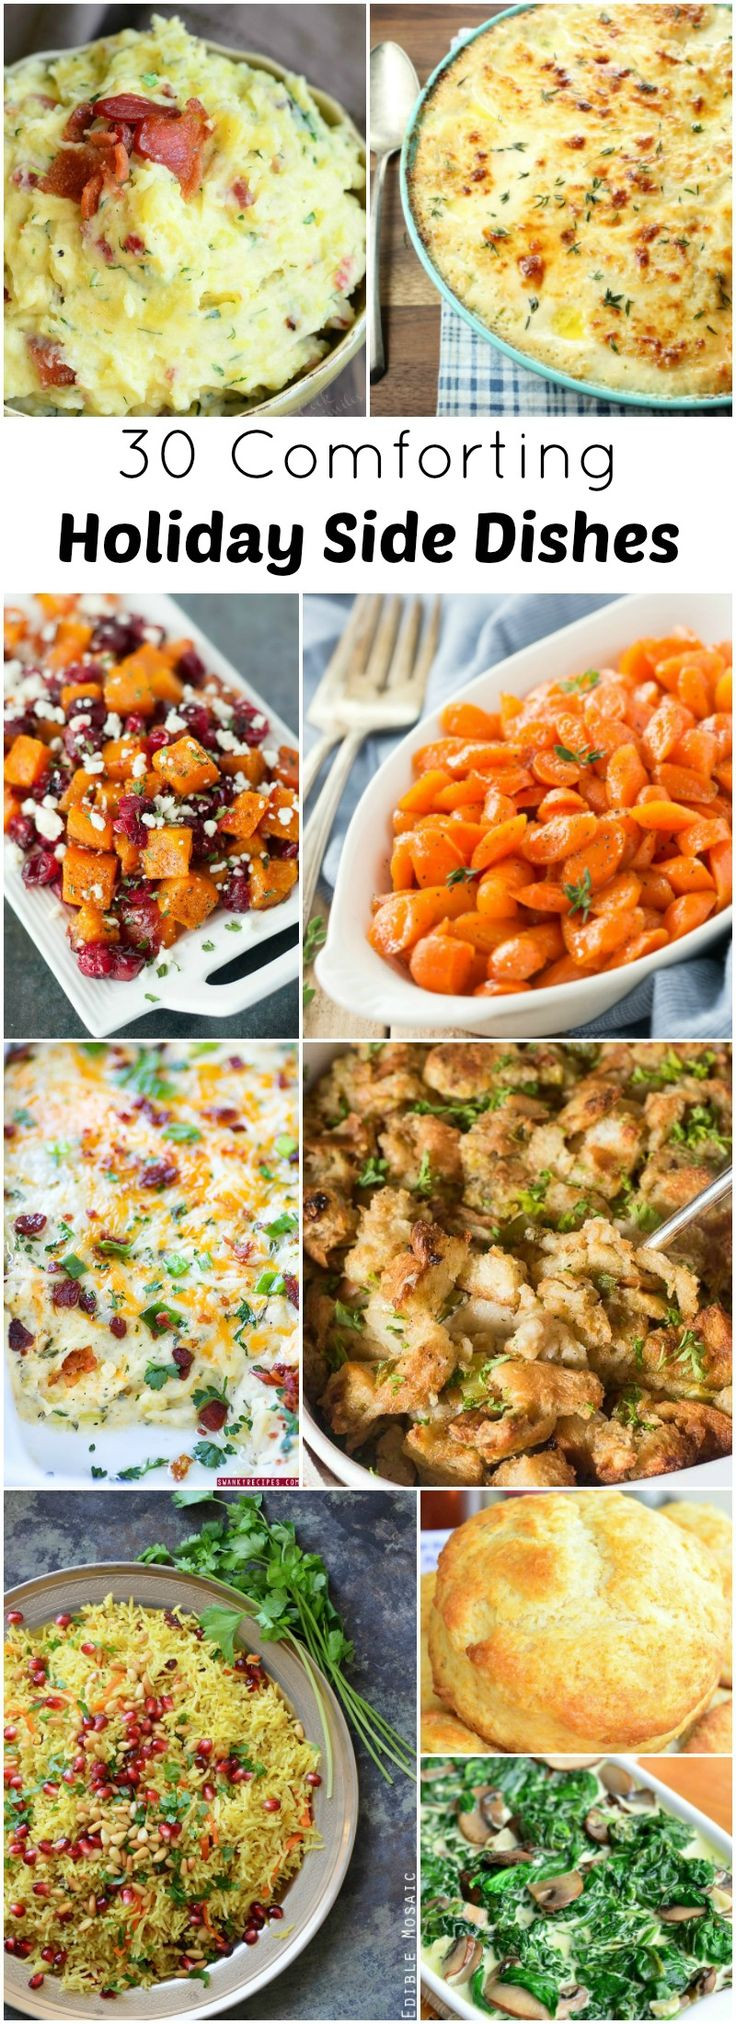 Ideas For Thanksgiving Dinner Side Dishes
 17 Best ideas about Holiday Side Dishes on Pinterest